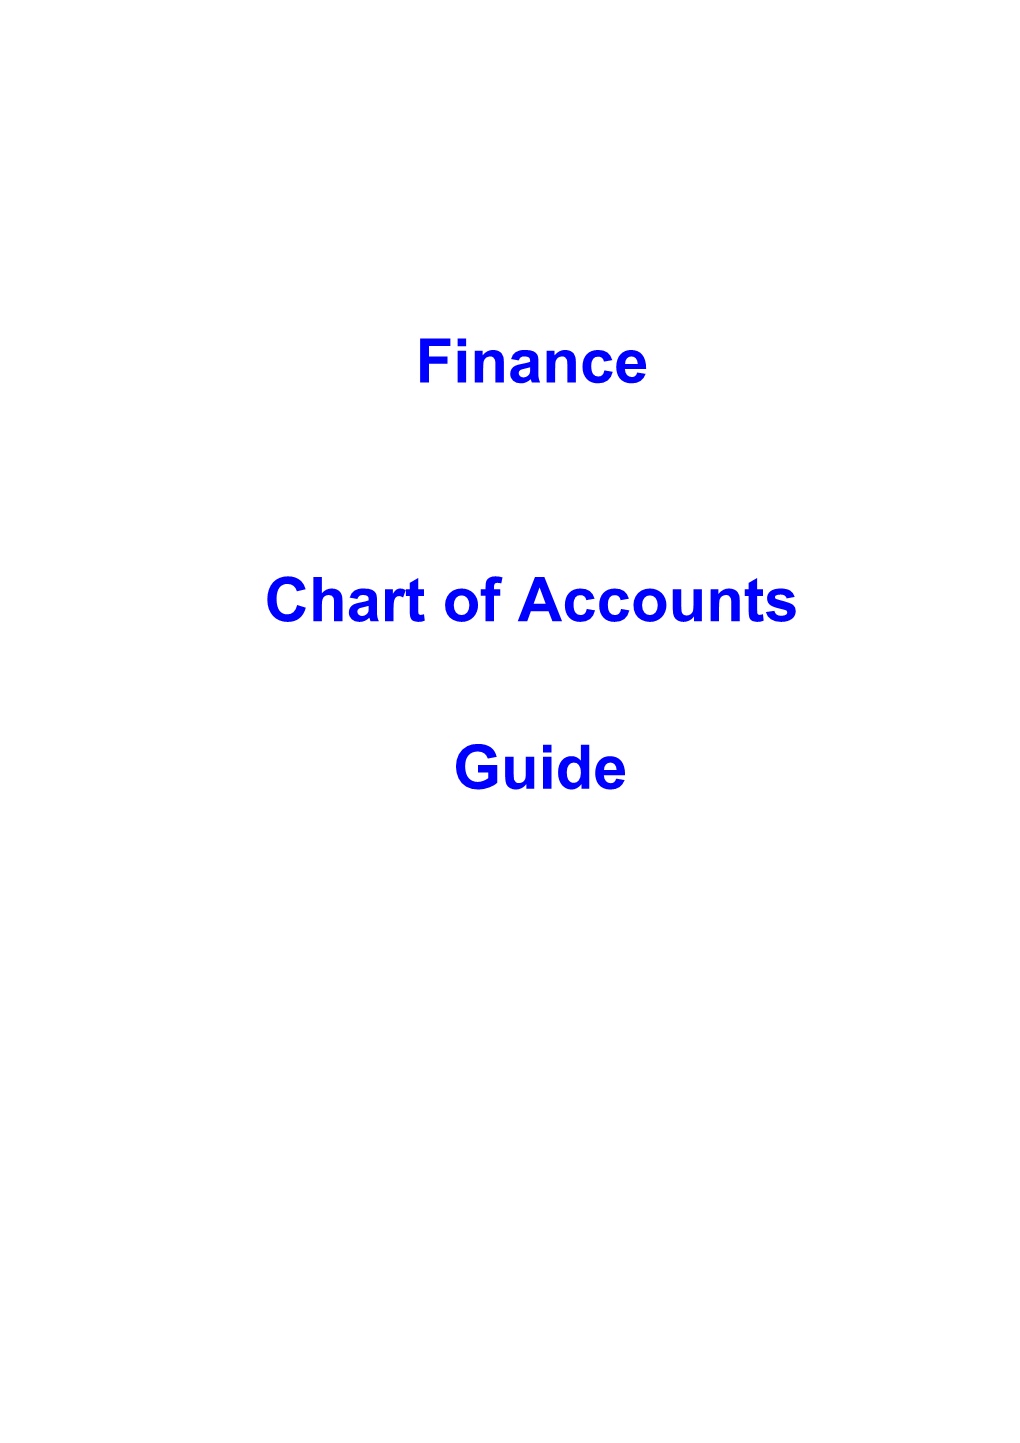 Changes to the Structure of the New Chart of Accounts